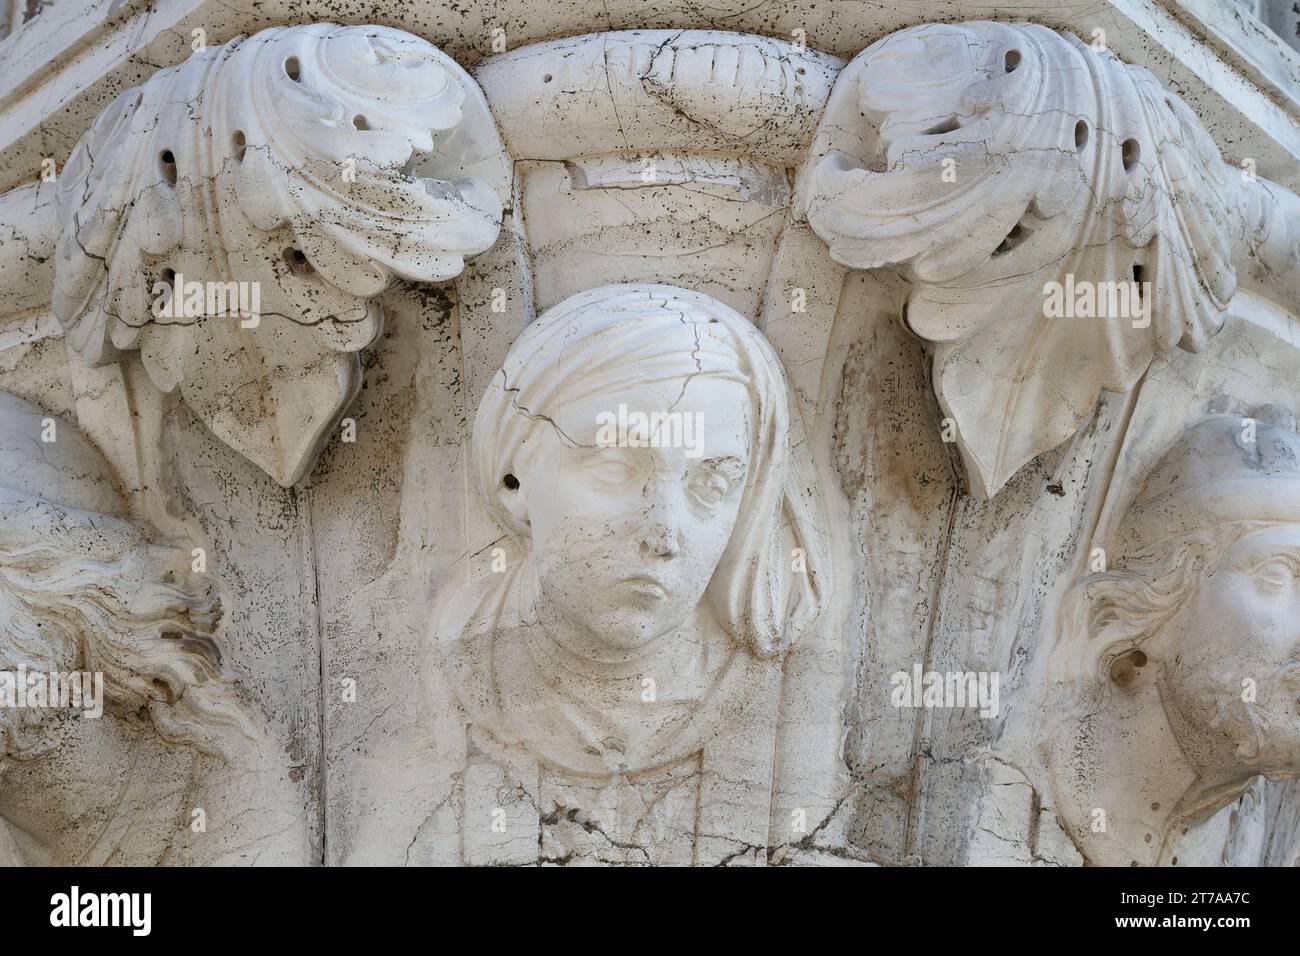 Latins - People of the World: how to recognize a stranger in the ancient Venice - Column capital of Palazzo Ducale (Doge's Palace, St Mark's Square) Stock Photo